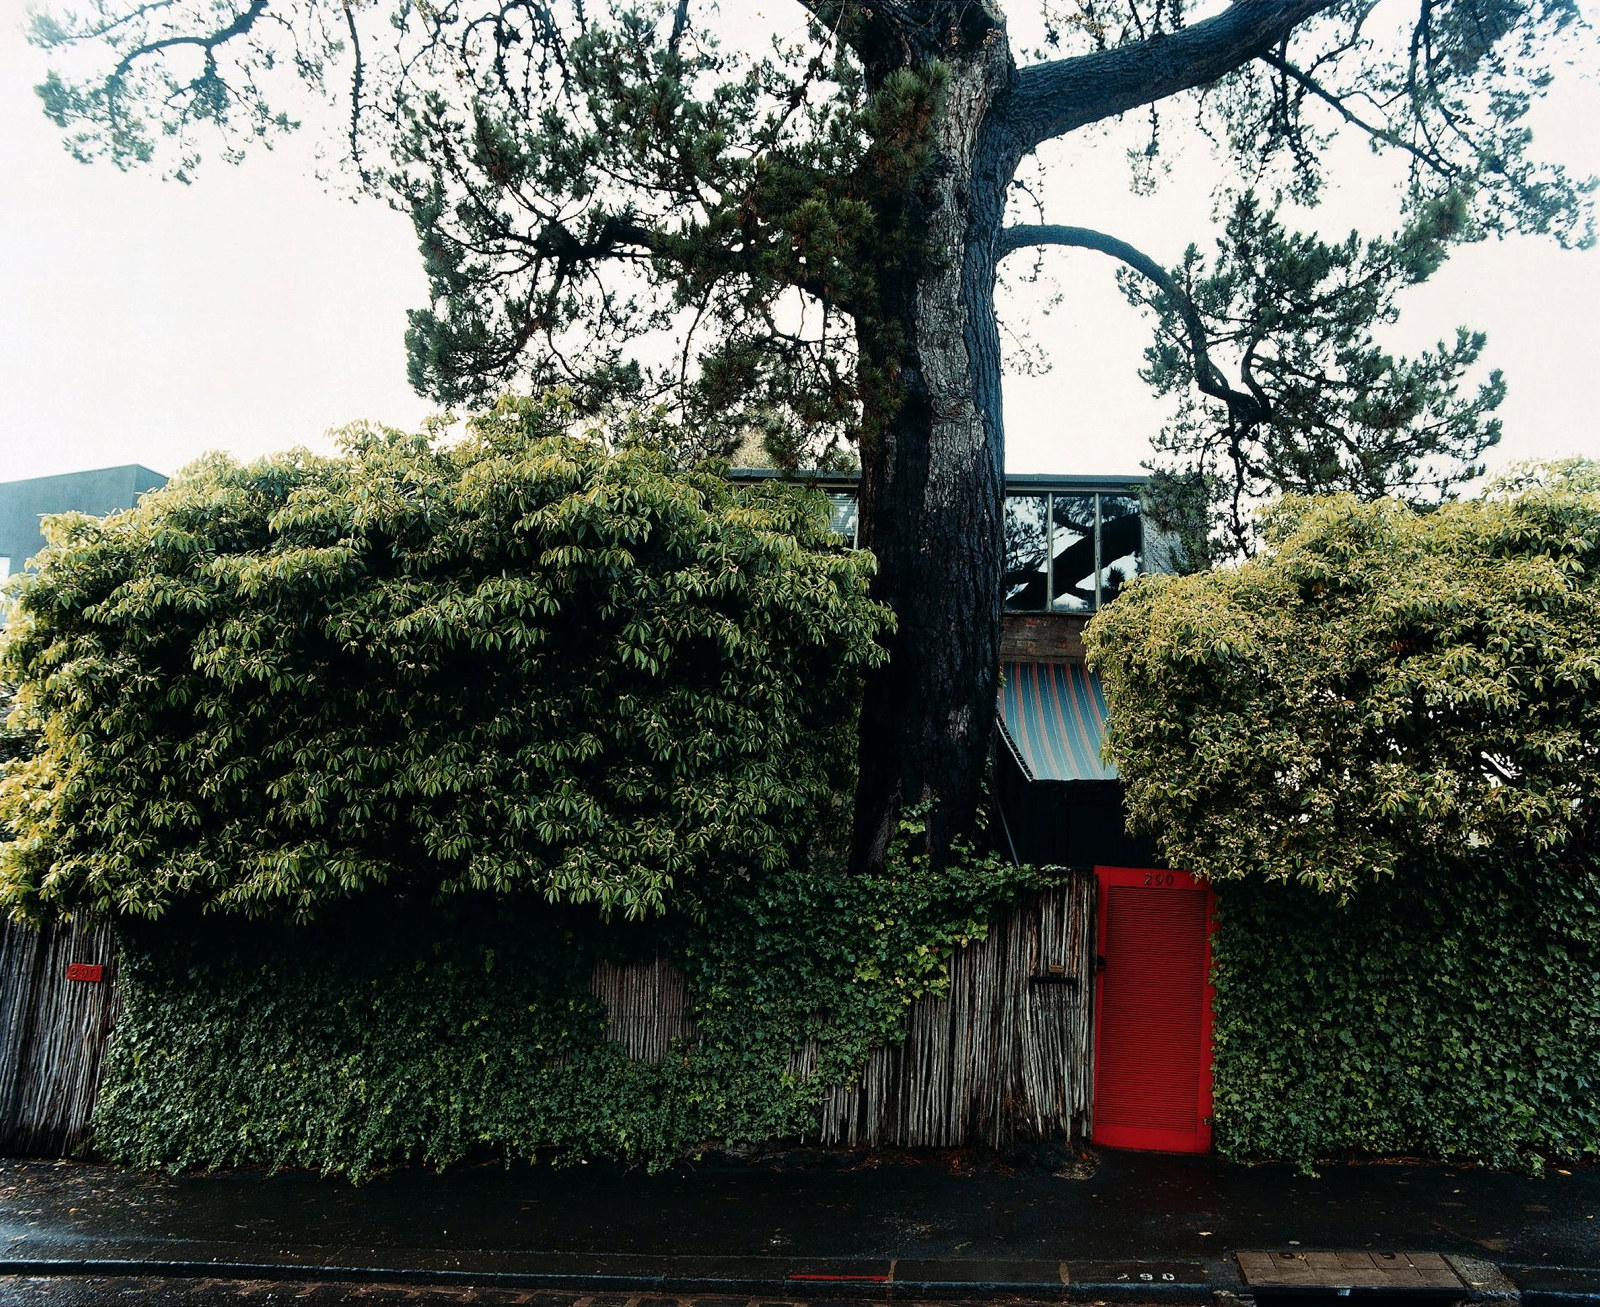 This is a colour photograph of a timber fence with a bright red gate. A house can be glimpsed between leafy trees and a tall pine tree